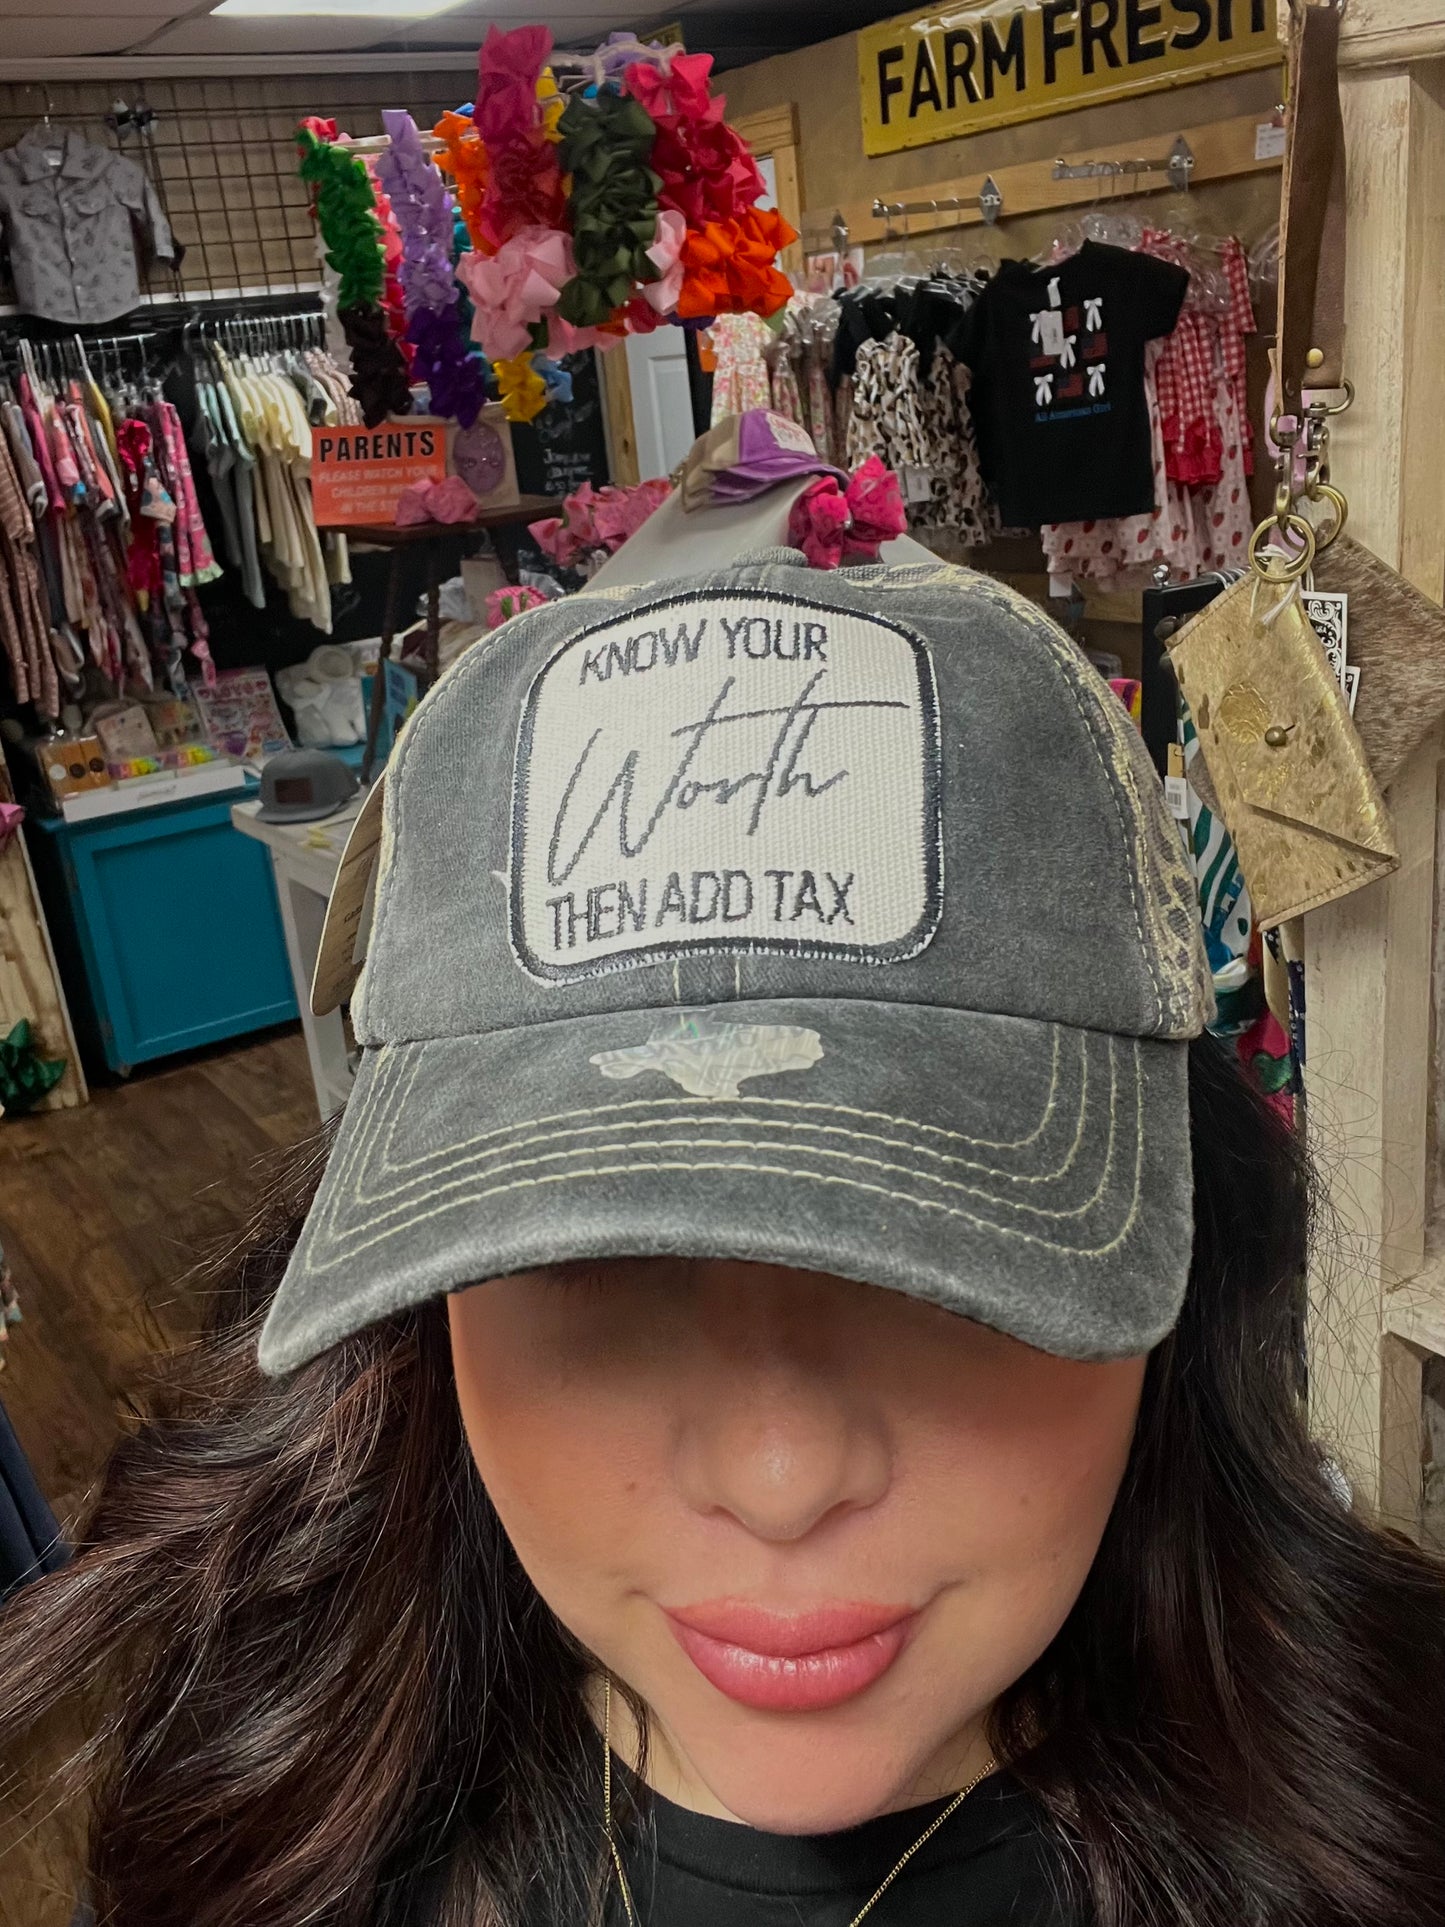 "Know your Worth then add Tax" Cap